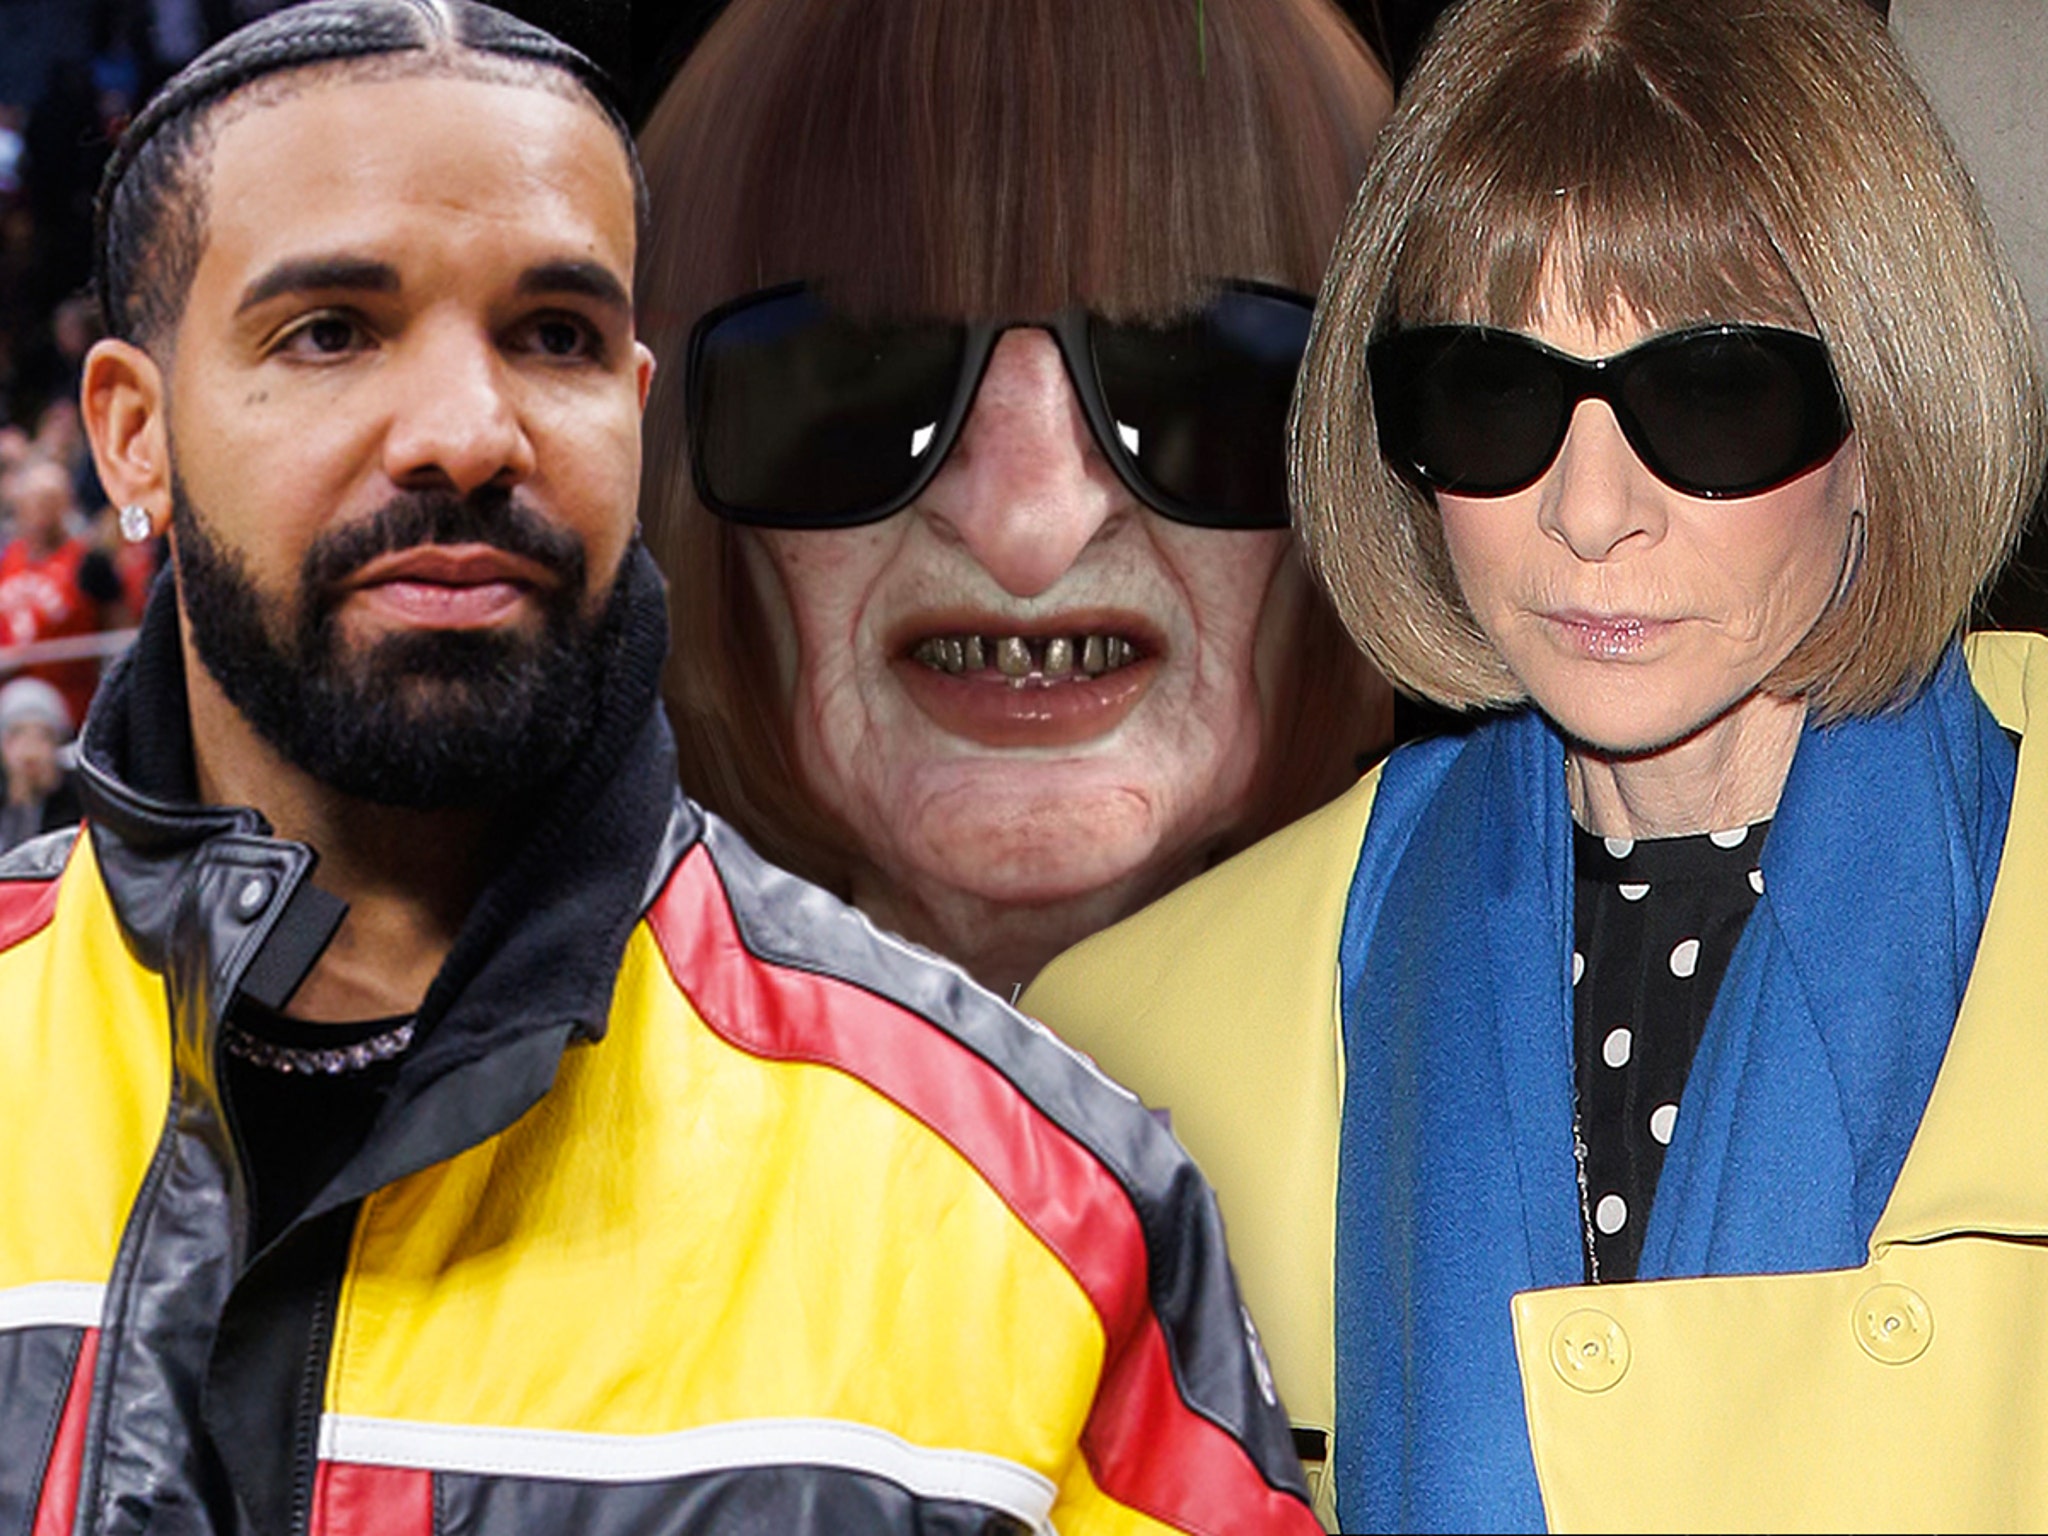 Drake includes monstrous visuals of Anna Wintour on his tour